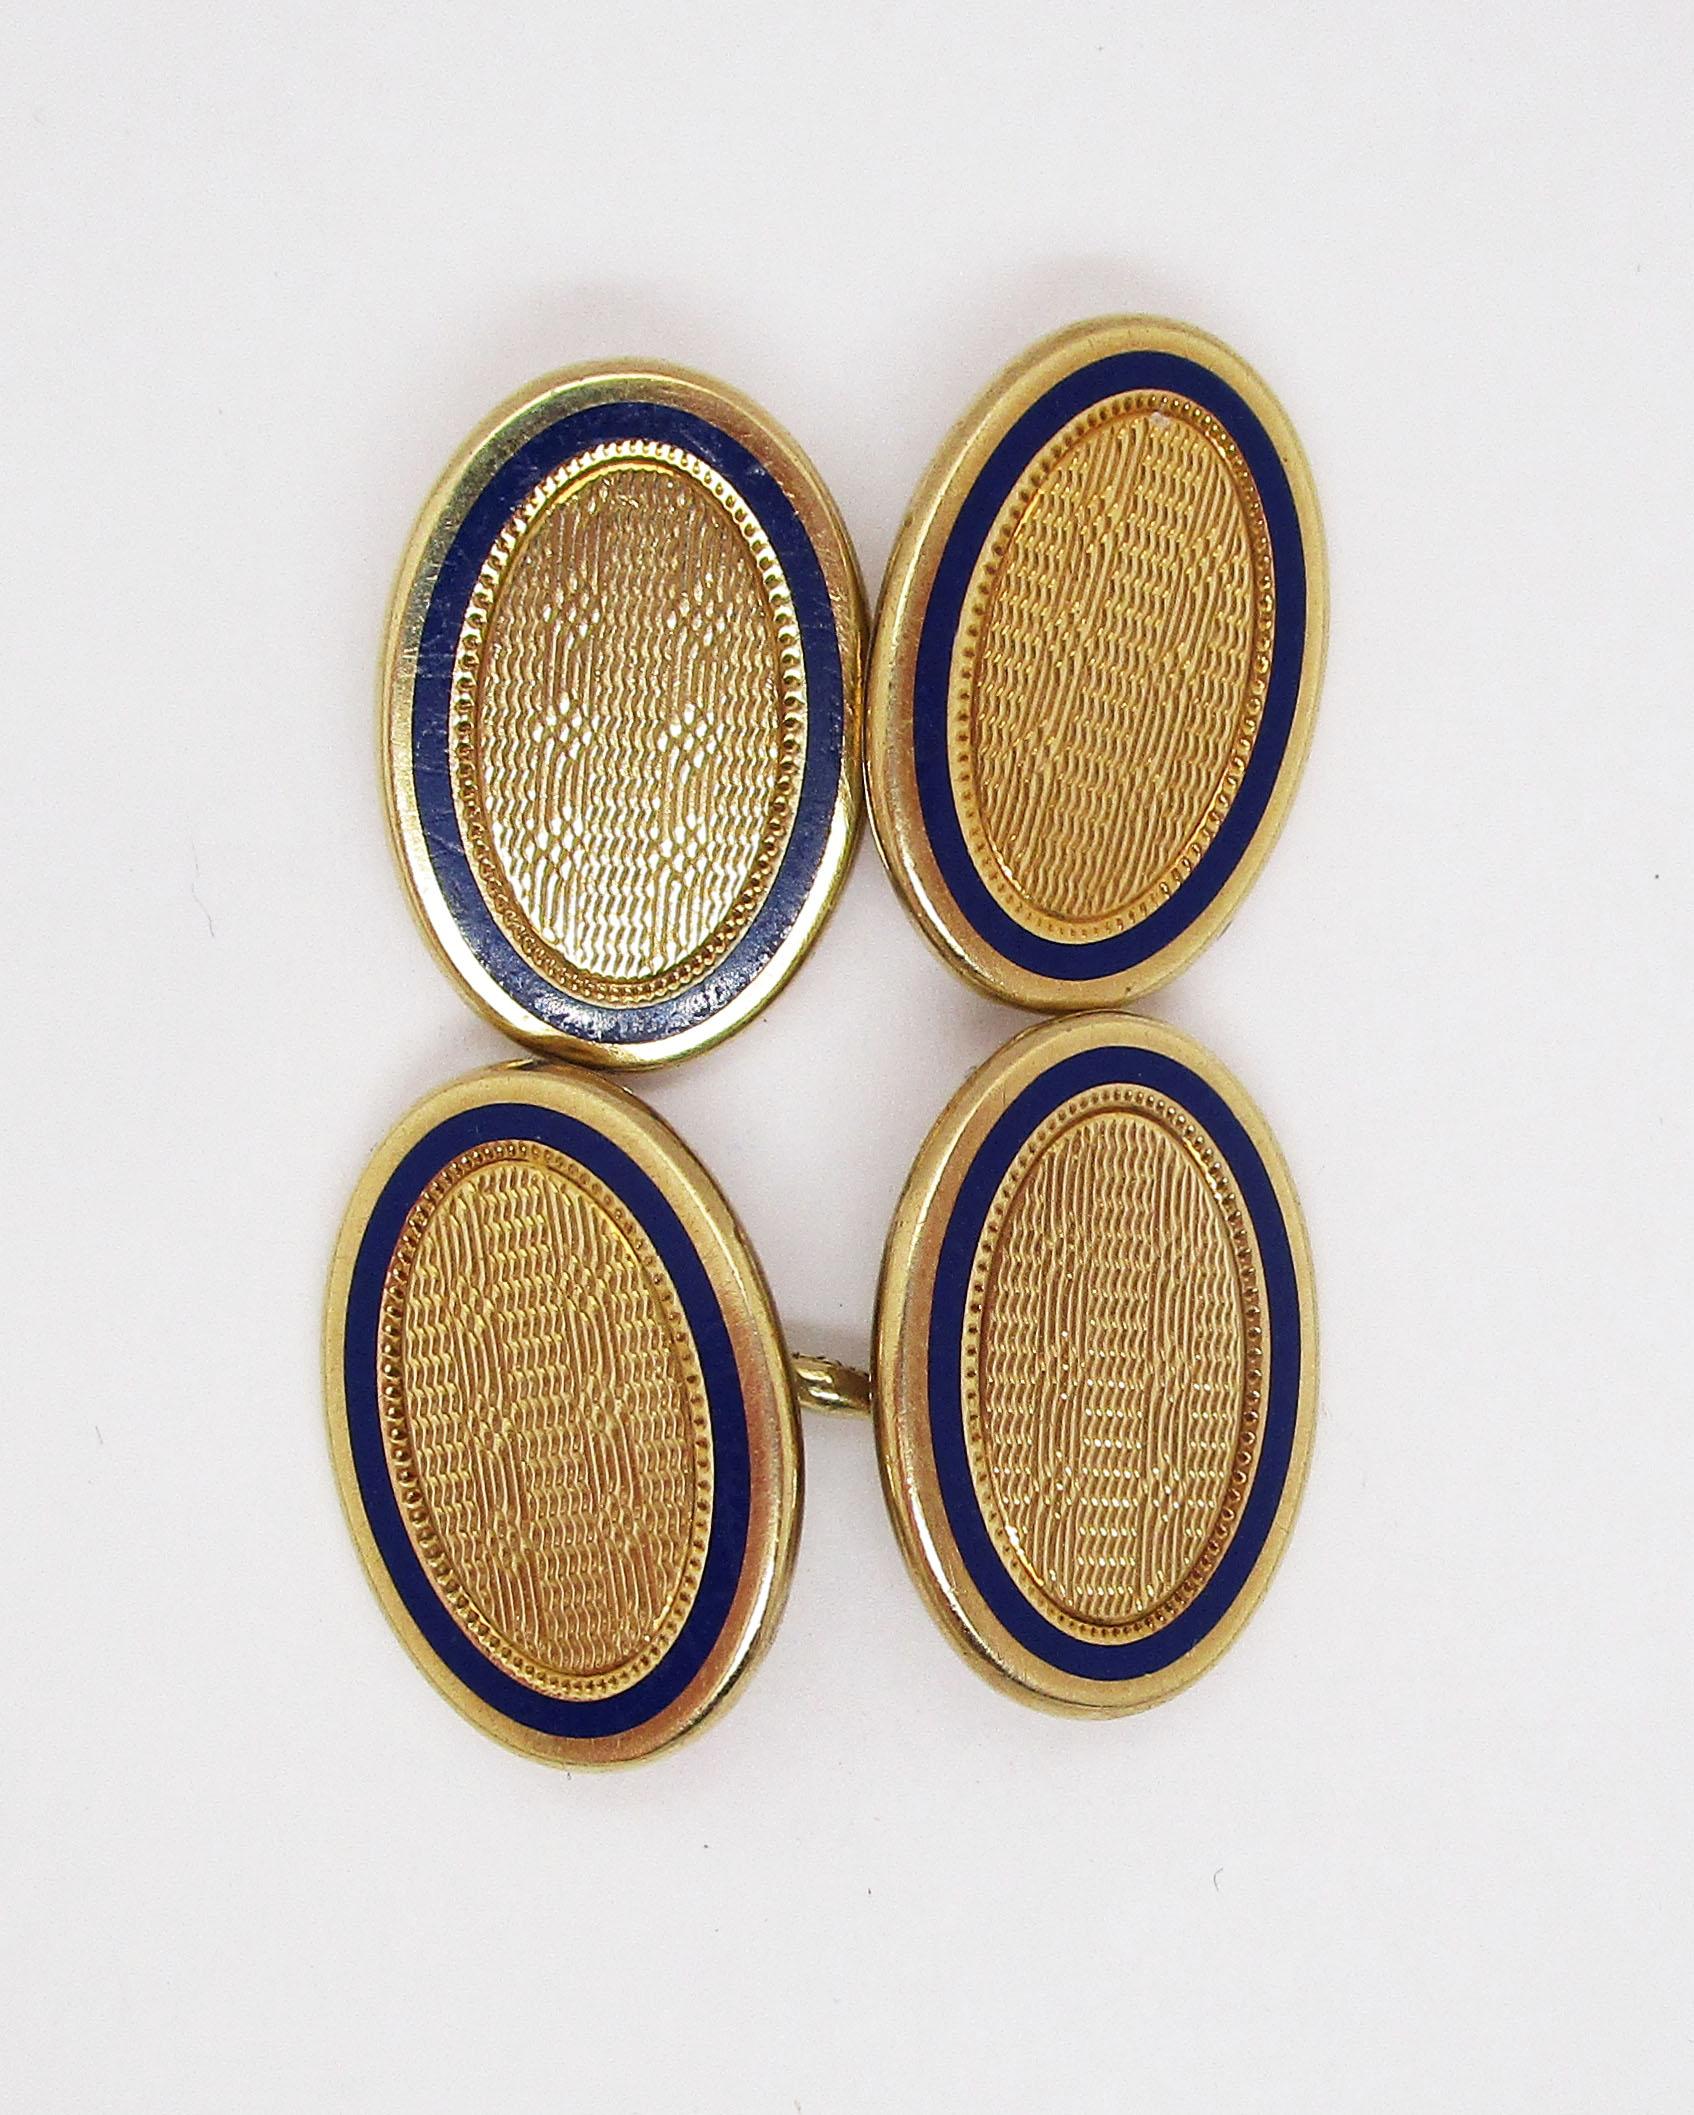 These excellent cufflinks by Durand & Co. are Edwardian and feature a fantastic combination of bright 14k yellow gold and royal blue enamel borders. The panels have a classic oval shape with a bold edge. The outside border is bright 14k gold,